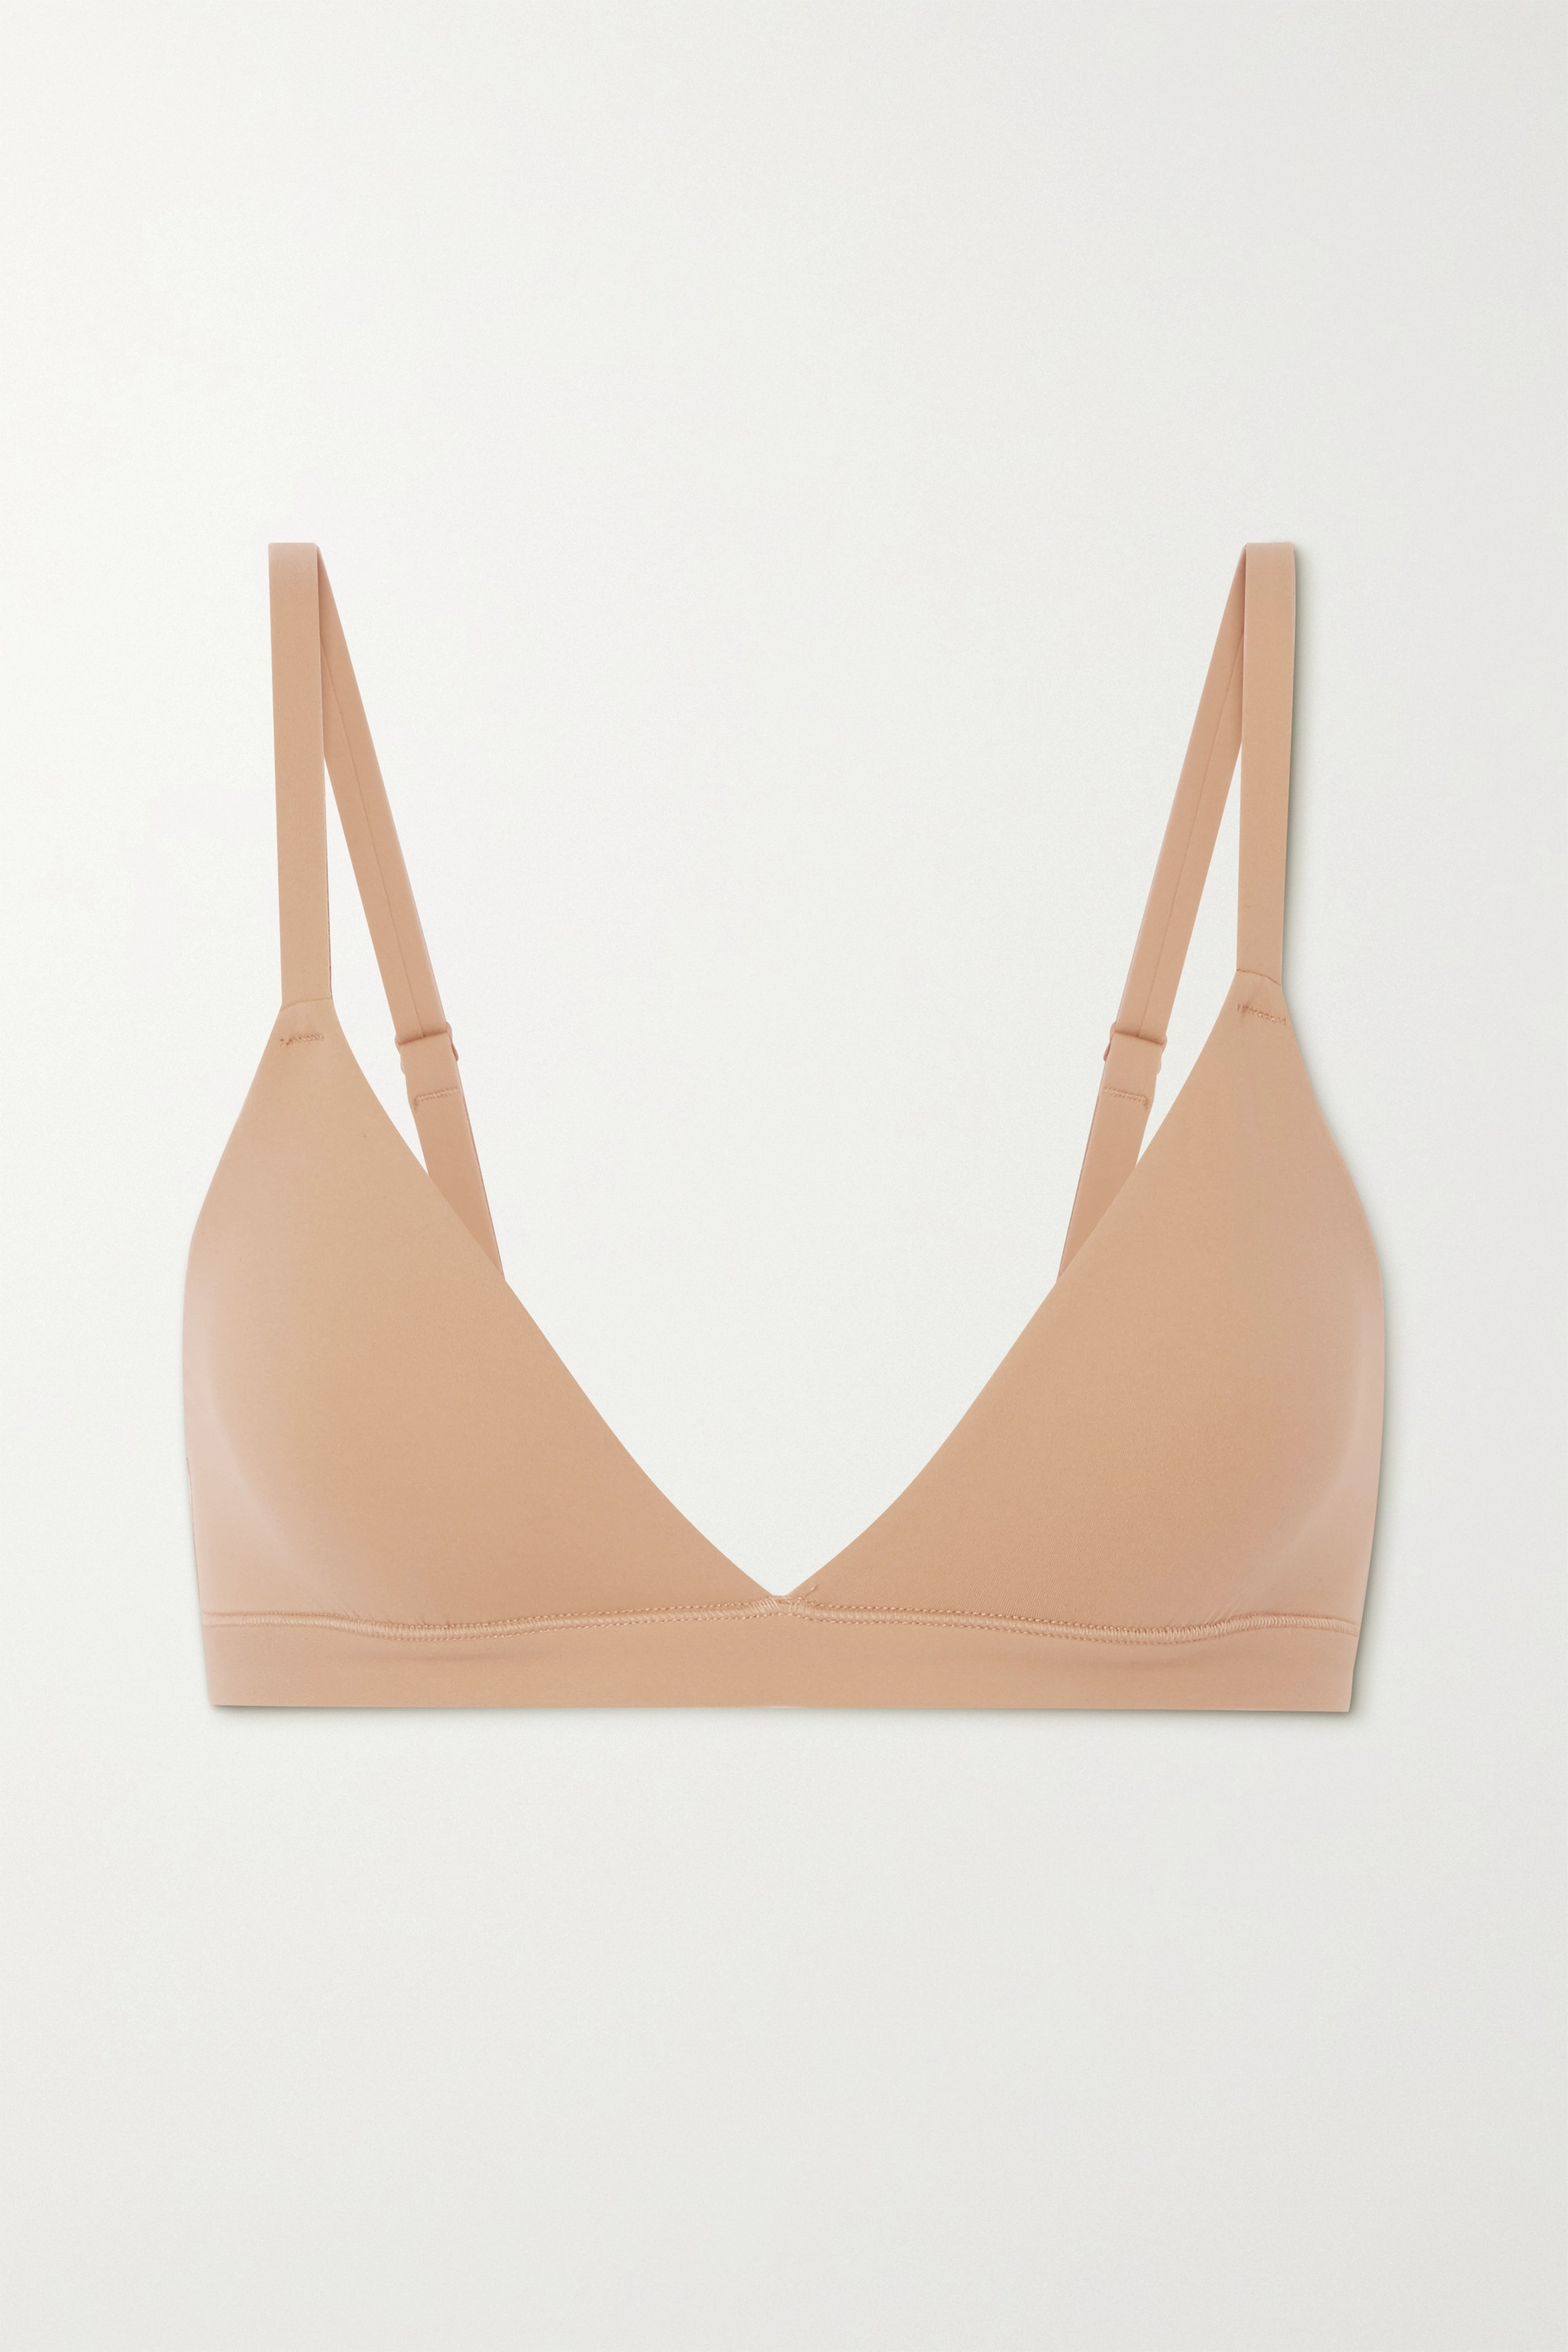 SKIMS + Fits Everybody Triangle Bralette in Clay